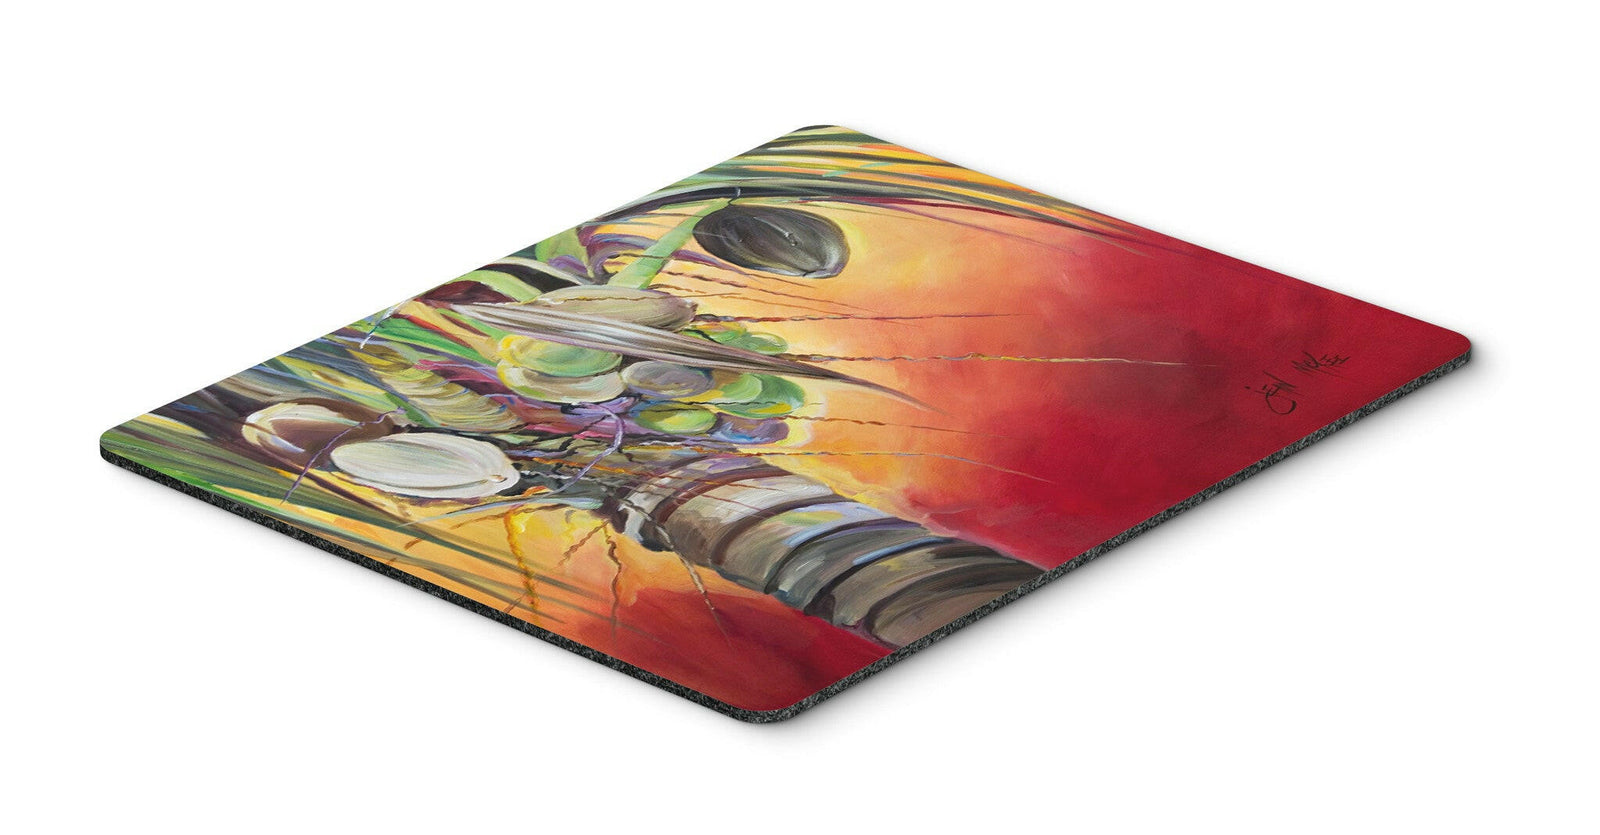 Sunset on the Coconut Tree Mouse Pad, Hot Pad or Trivet JMK1133MP by Caroline's Treasures